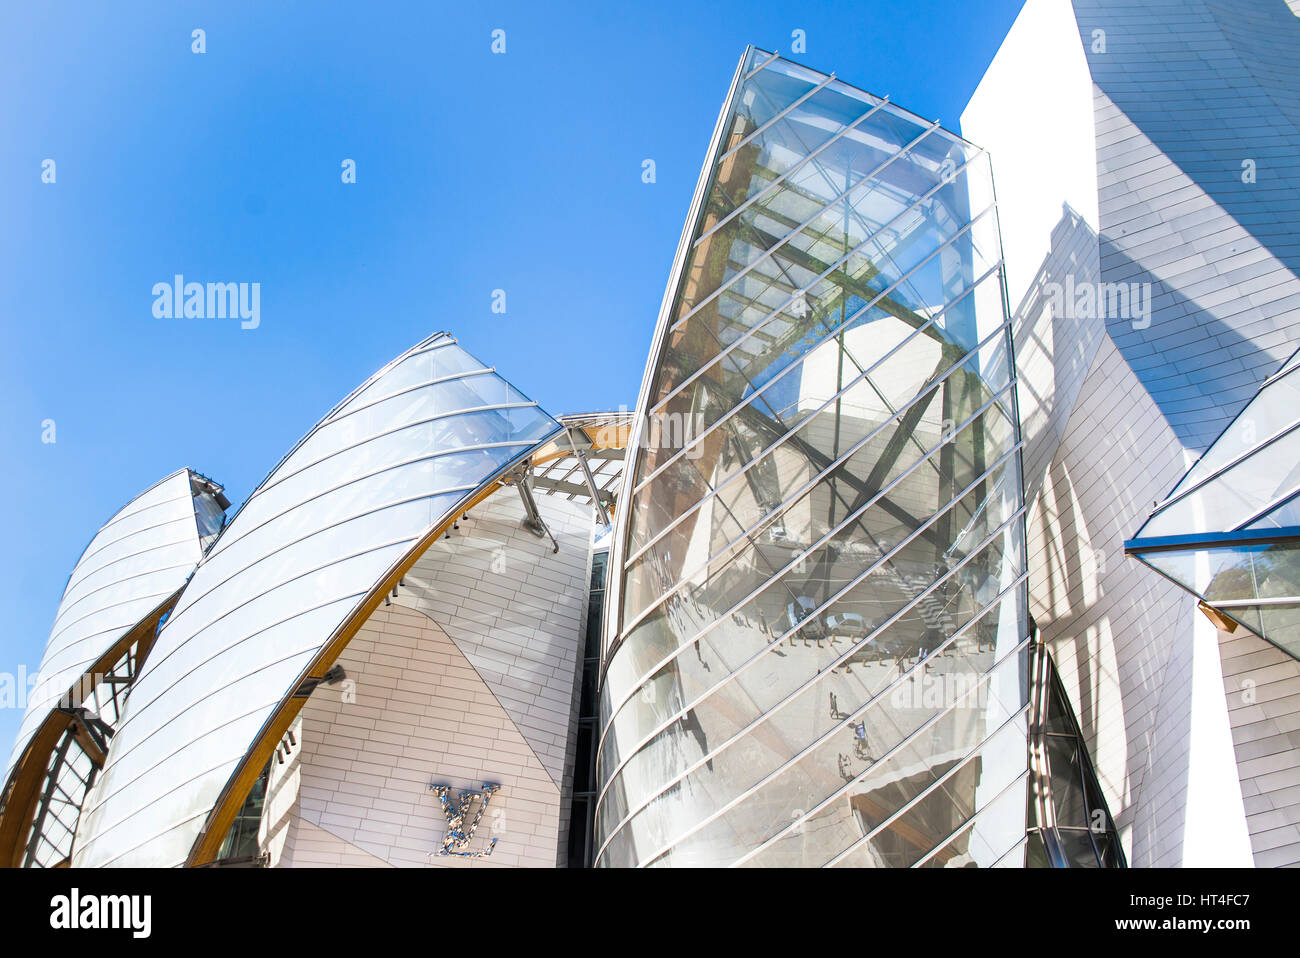 The cafeteria of the modern art museum of the Louis Vuitton Foundation in  Paris Porte Maillot Stock Photo - Alamy